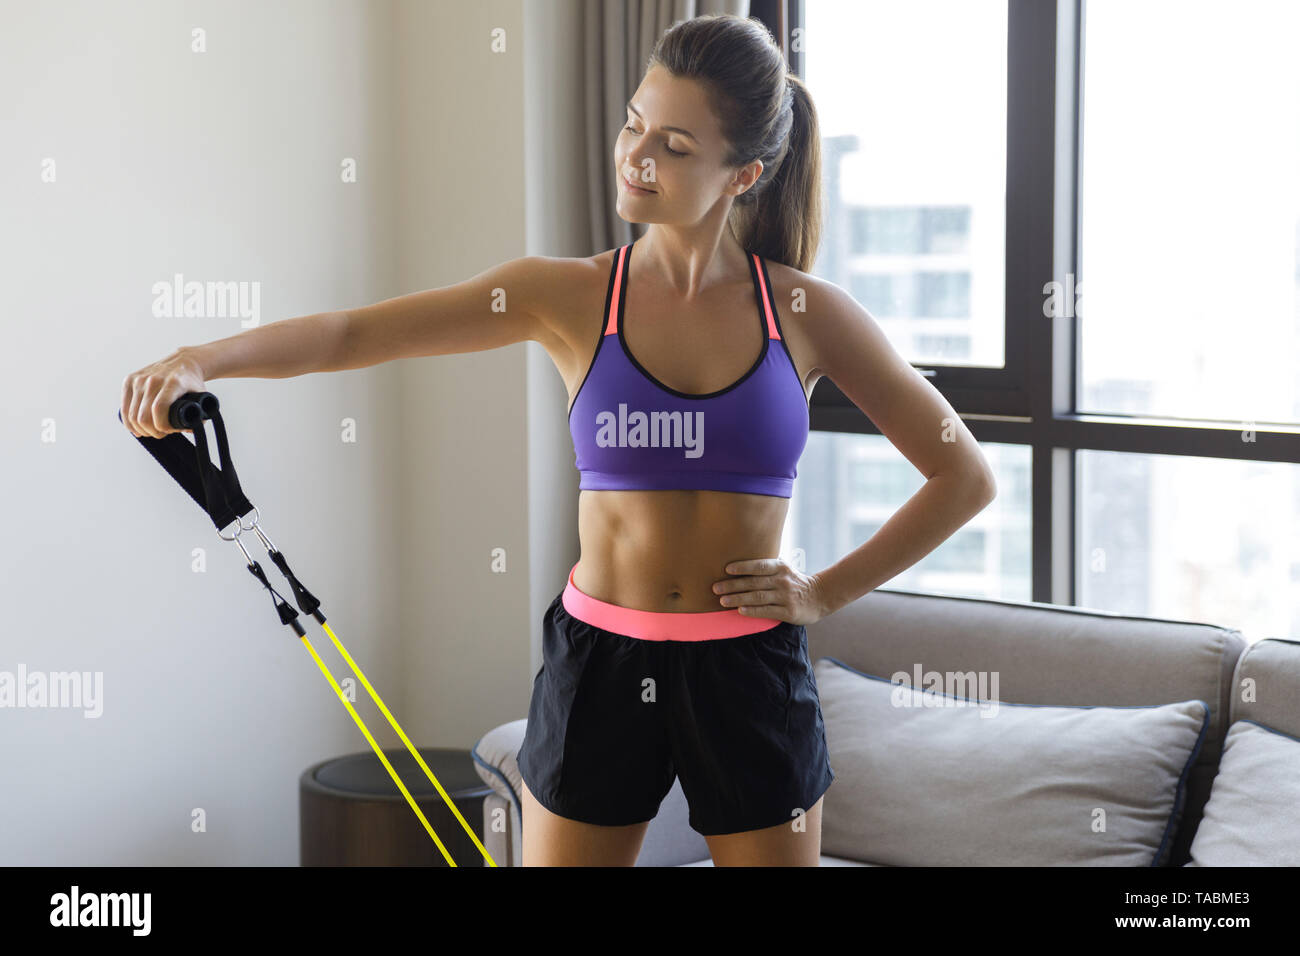 Woman during home workout with a rubber resistance bands Stock Photo